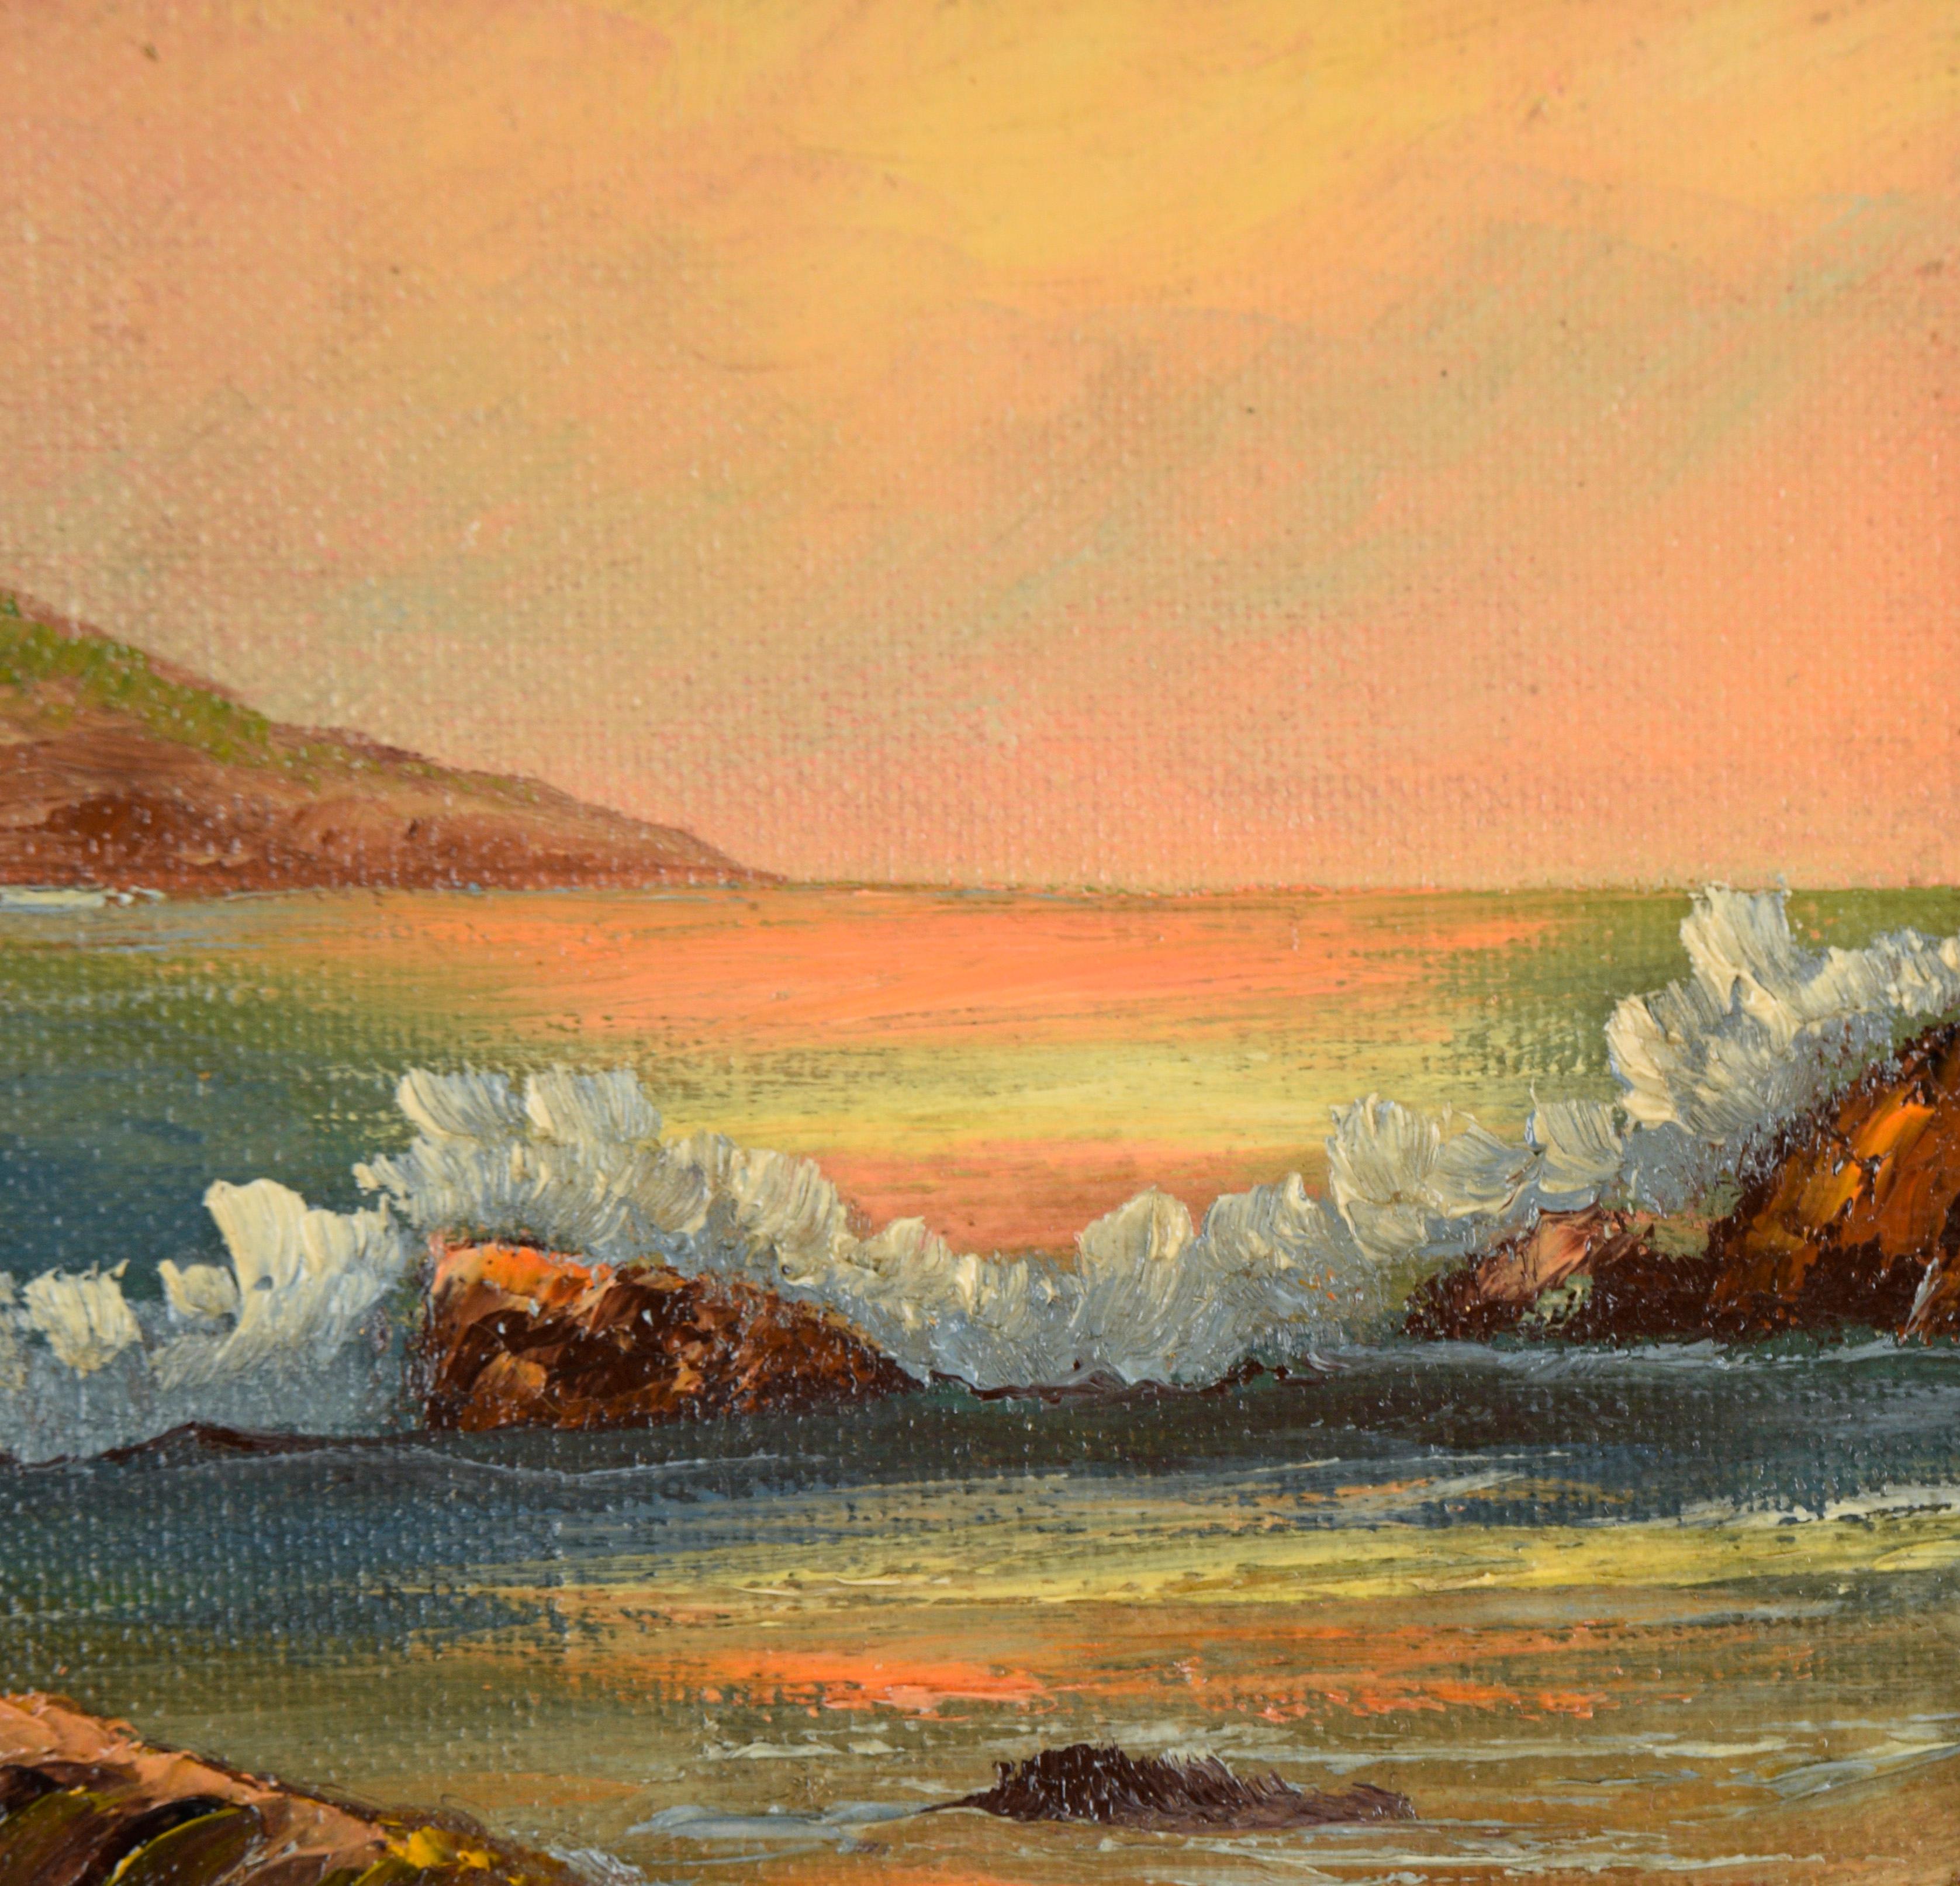 Sunset Seascape - Small Plein Air Oil Painting on Canvas 1